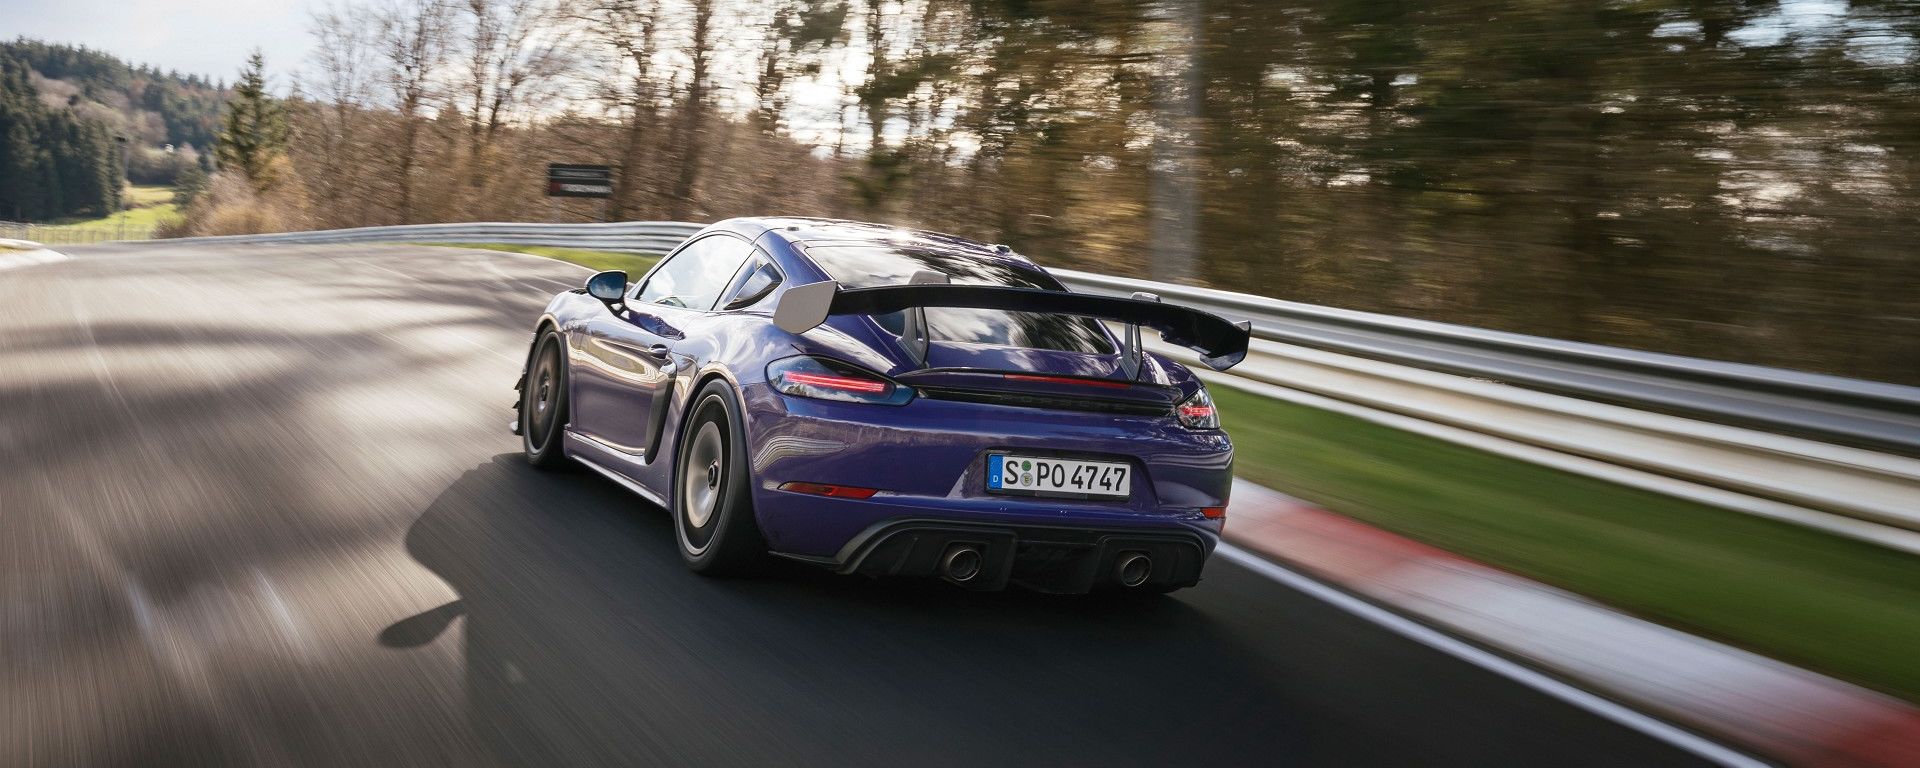 manthey-kit-718-cayman-gt4-rs-teaser